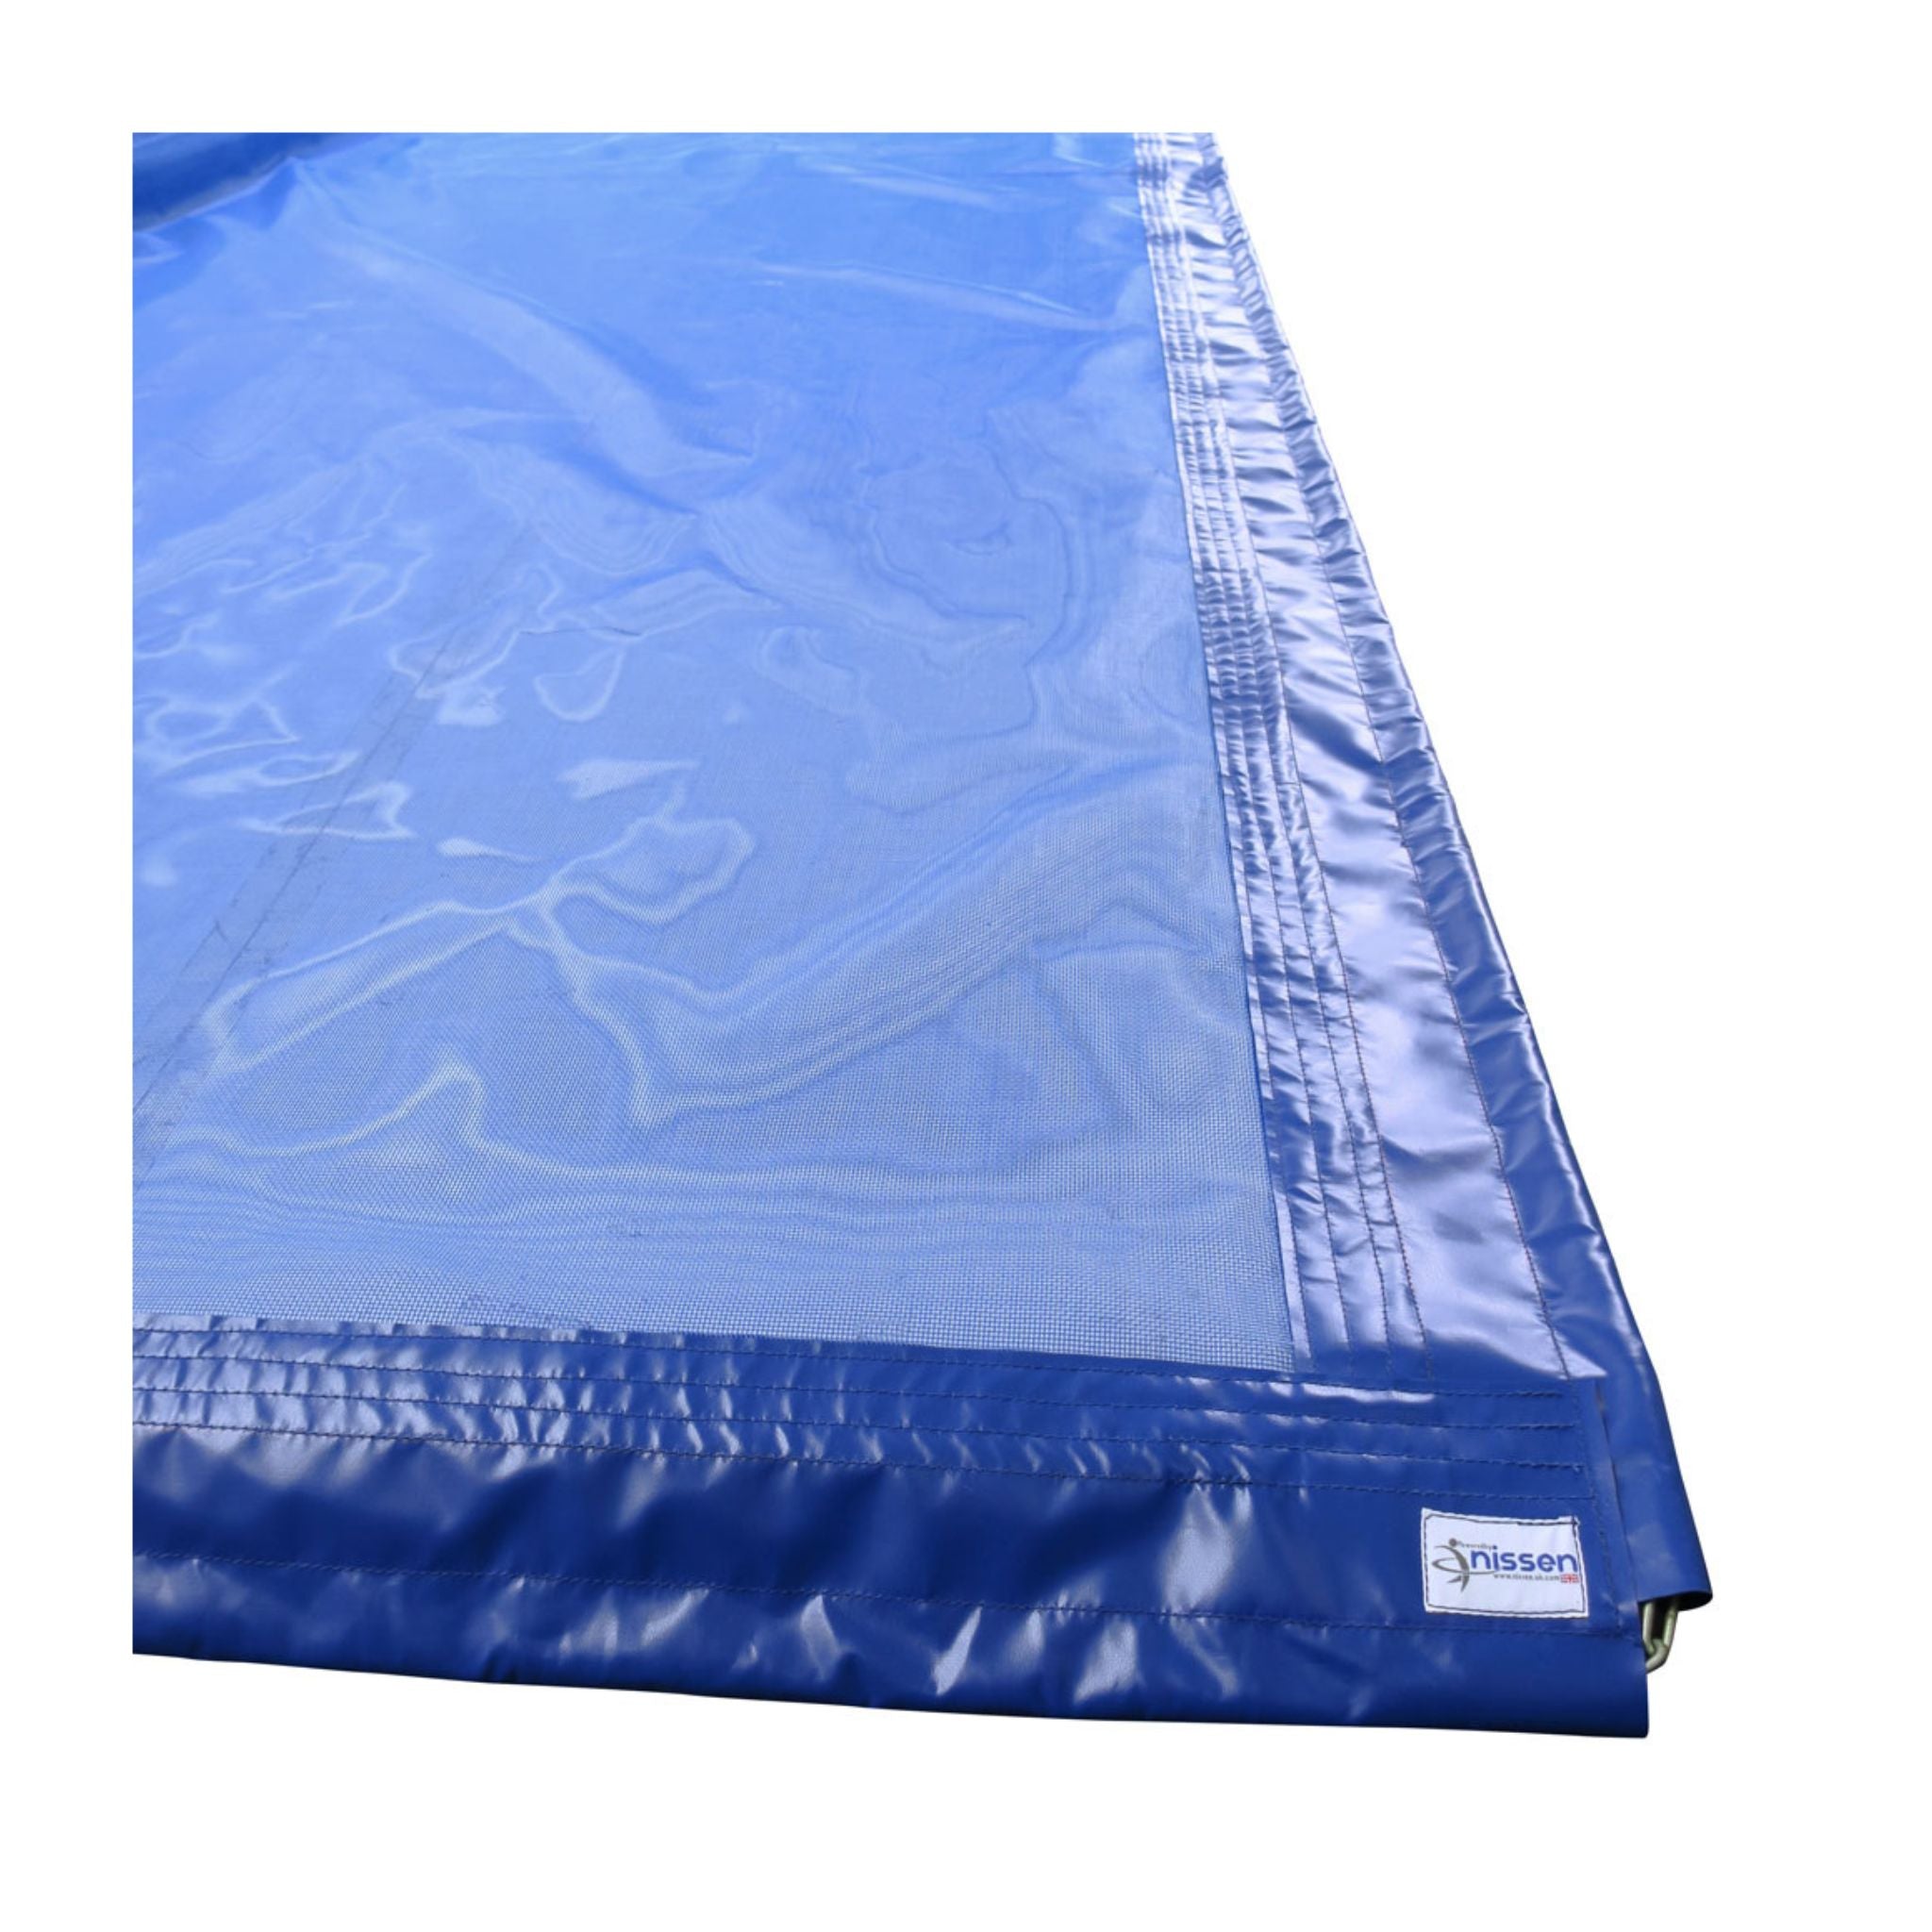 Sandpit cover pvc with mesh